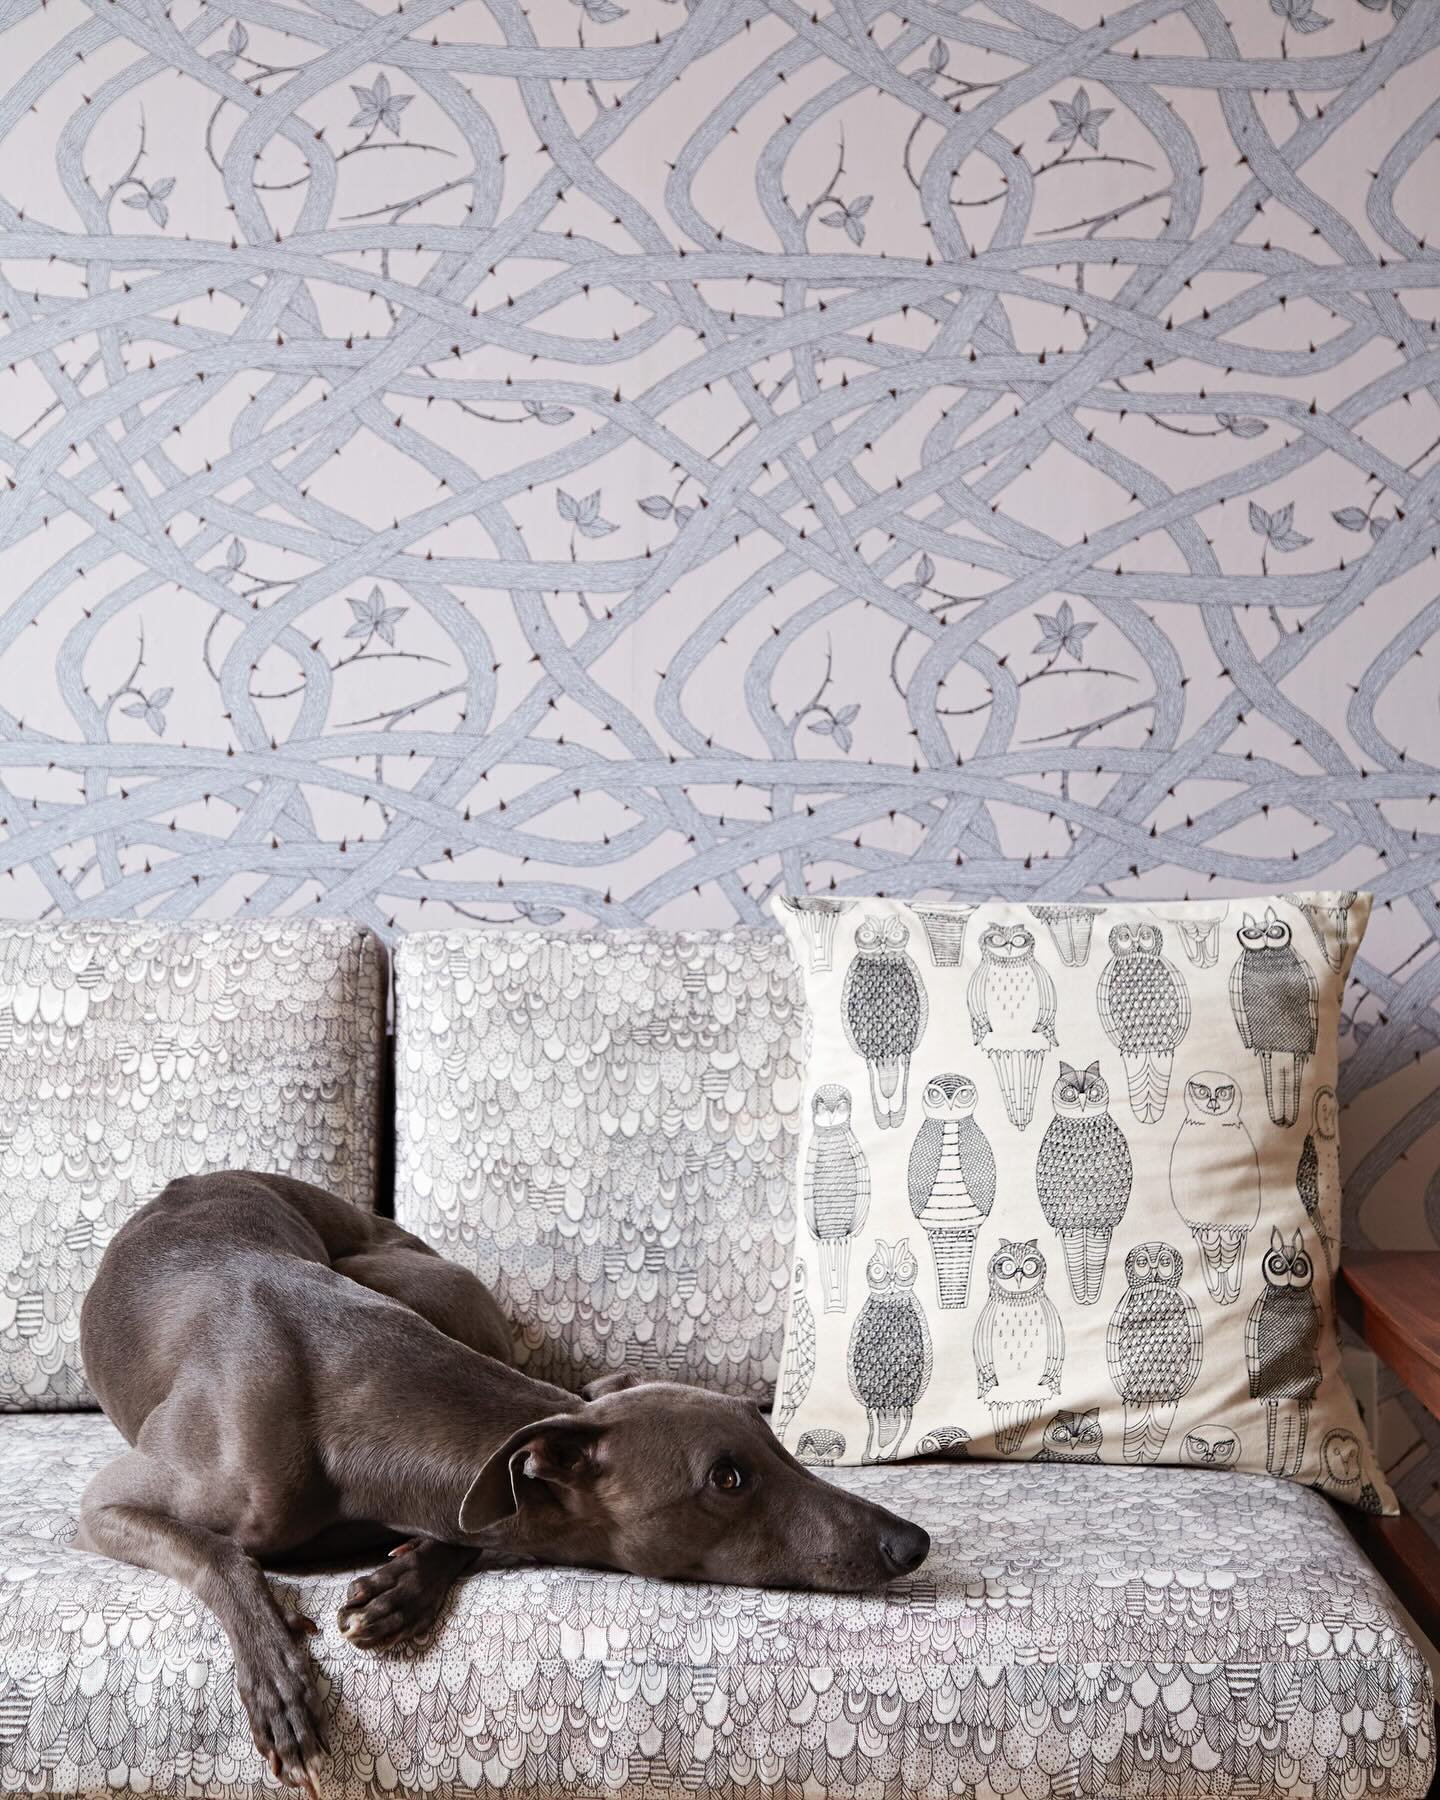 Claude in our old flat in North London, surrounded by pattern. Taken from my book Quiet Pattern, published 6 years ago this month 🤍🐾
📷 @aluncallenderphoto 

#quietpattern #whippetlove #whippetsofinstagram #bramblewallpaper #whippetlife